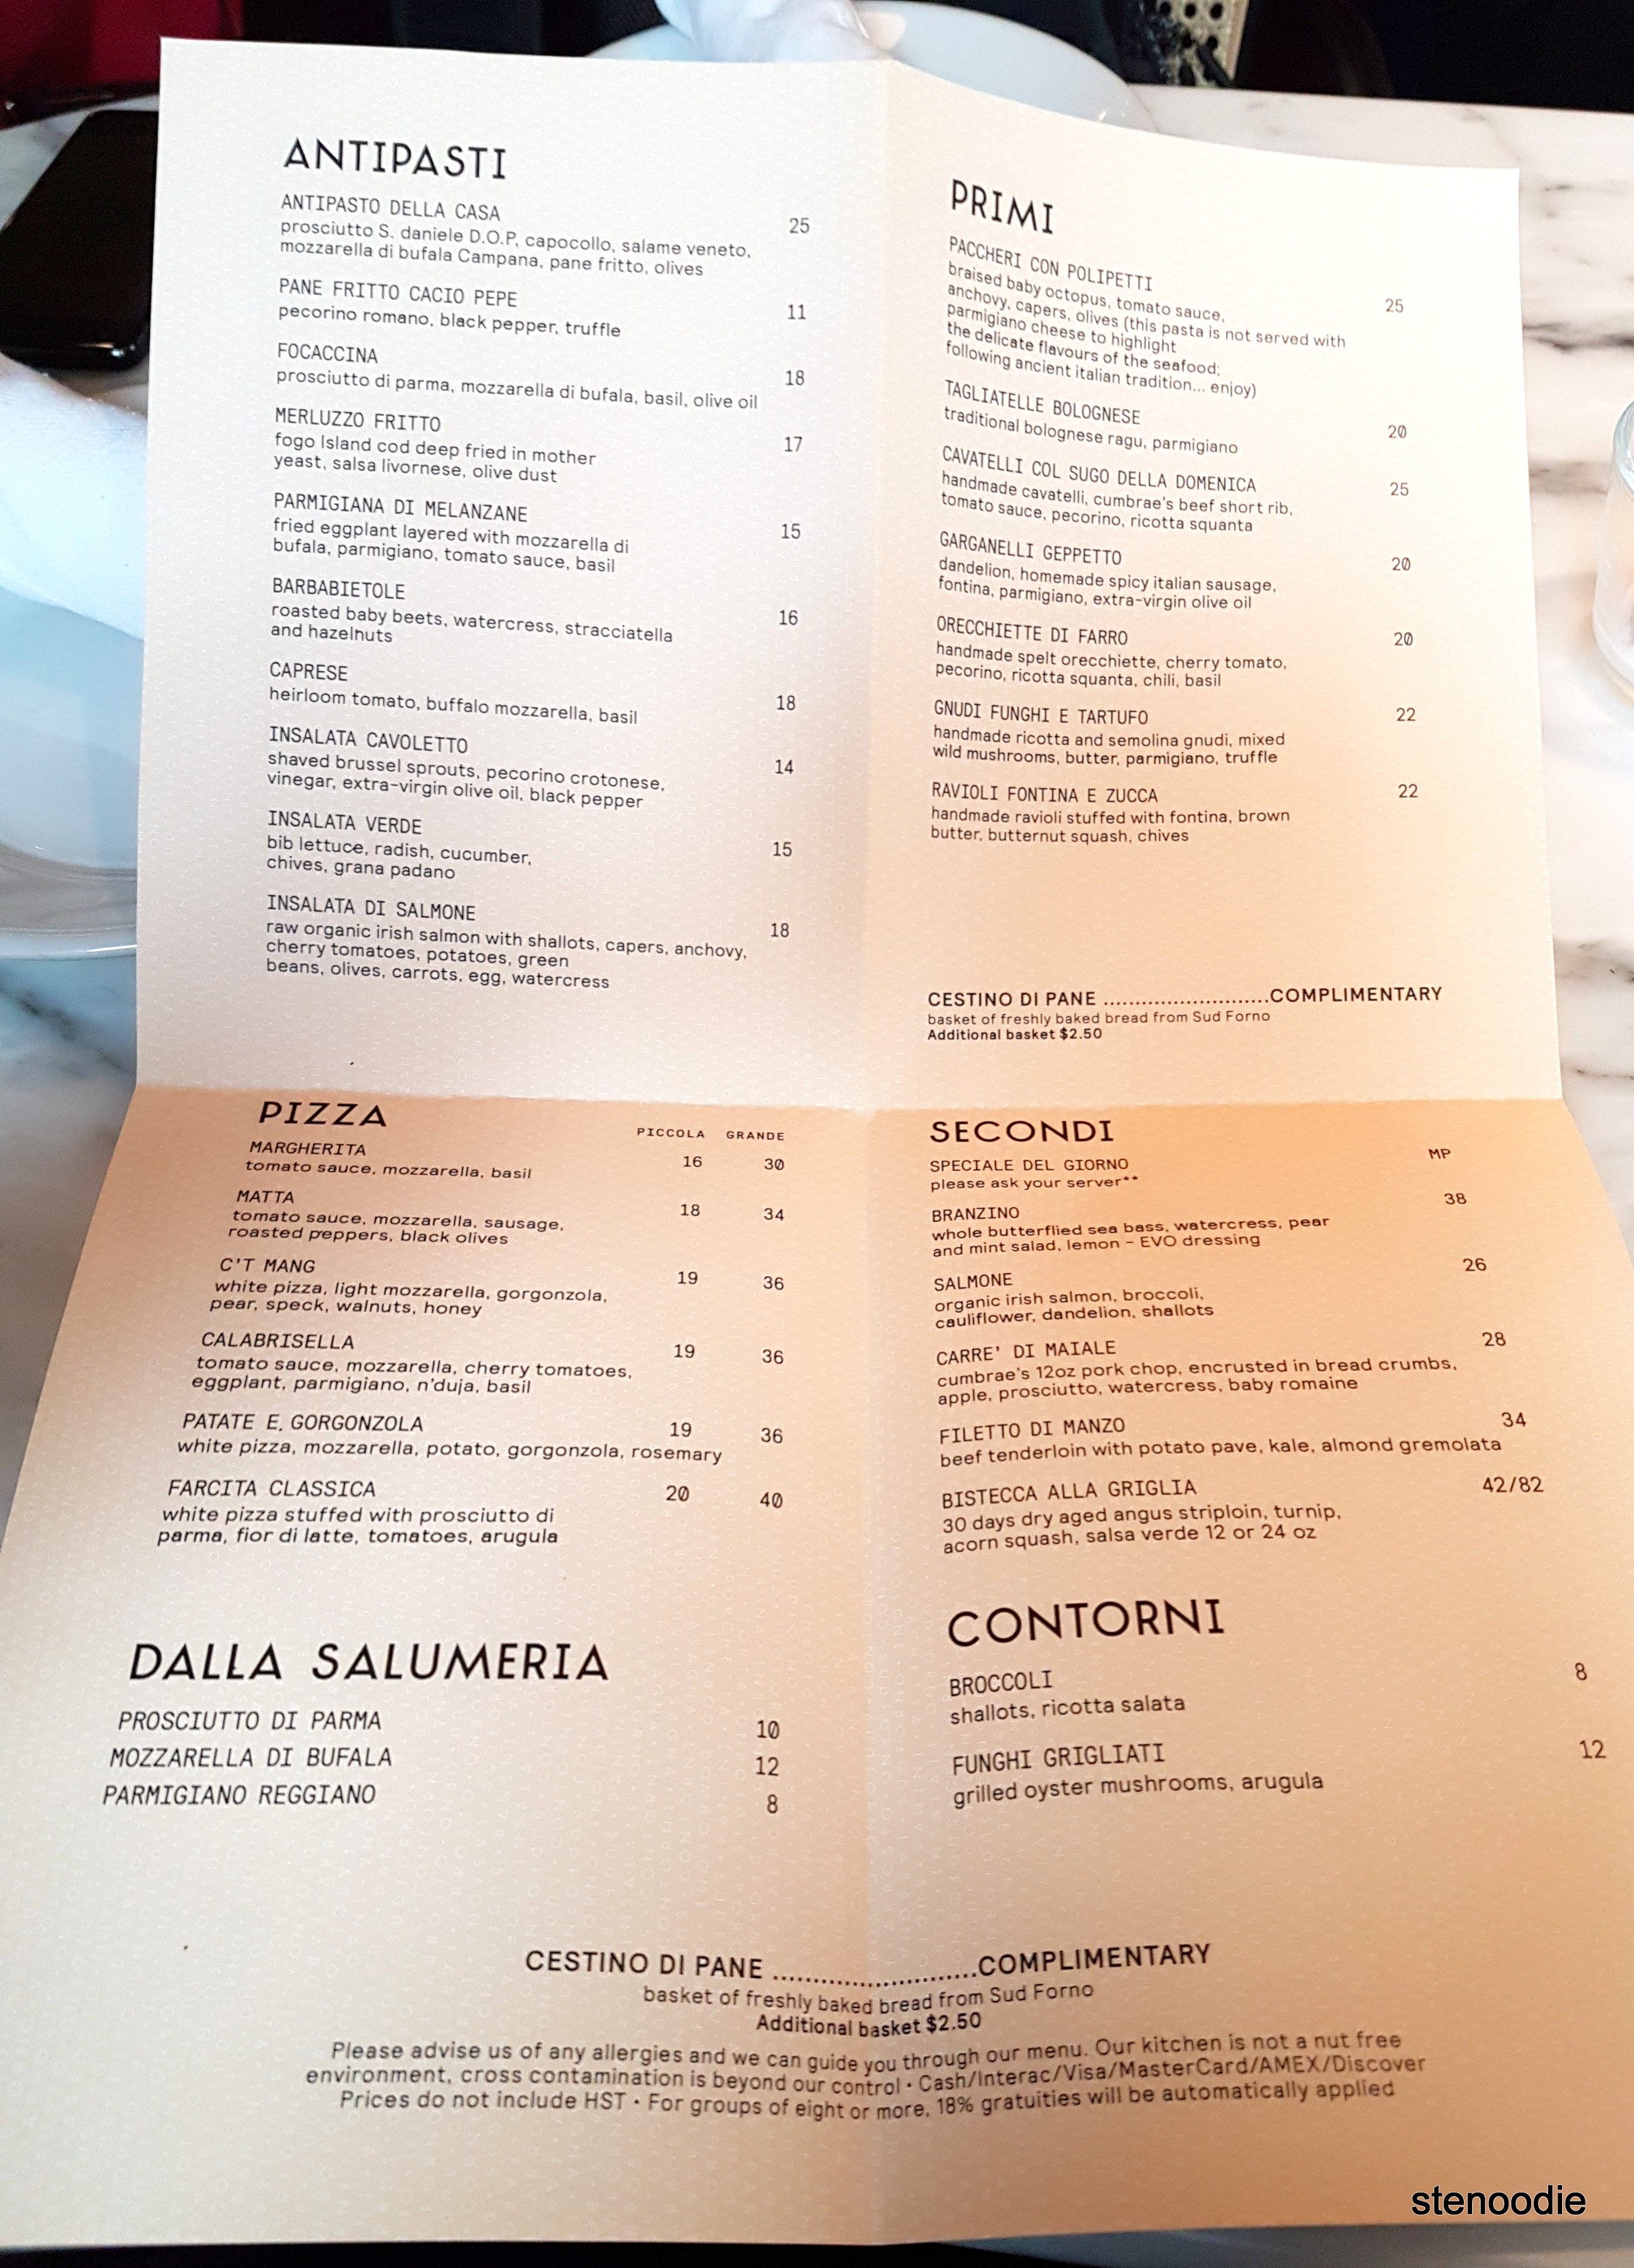  Sud Forno menu and prices